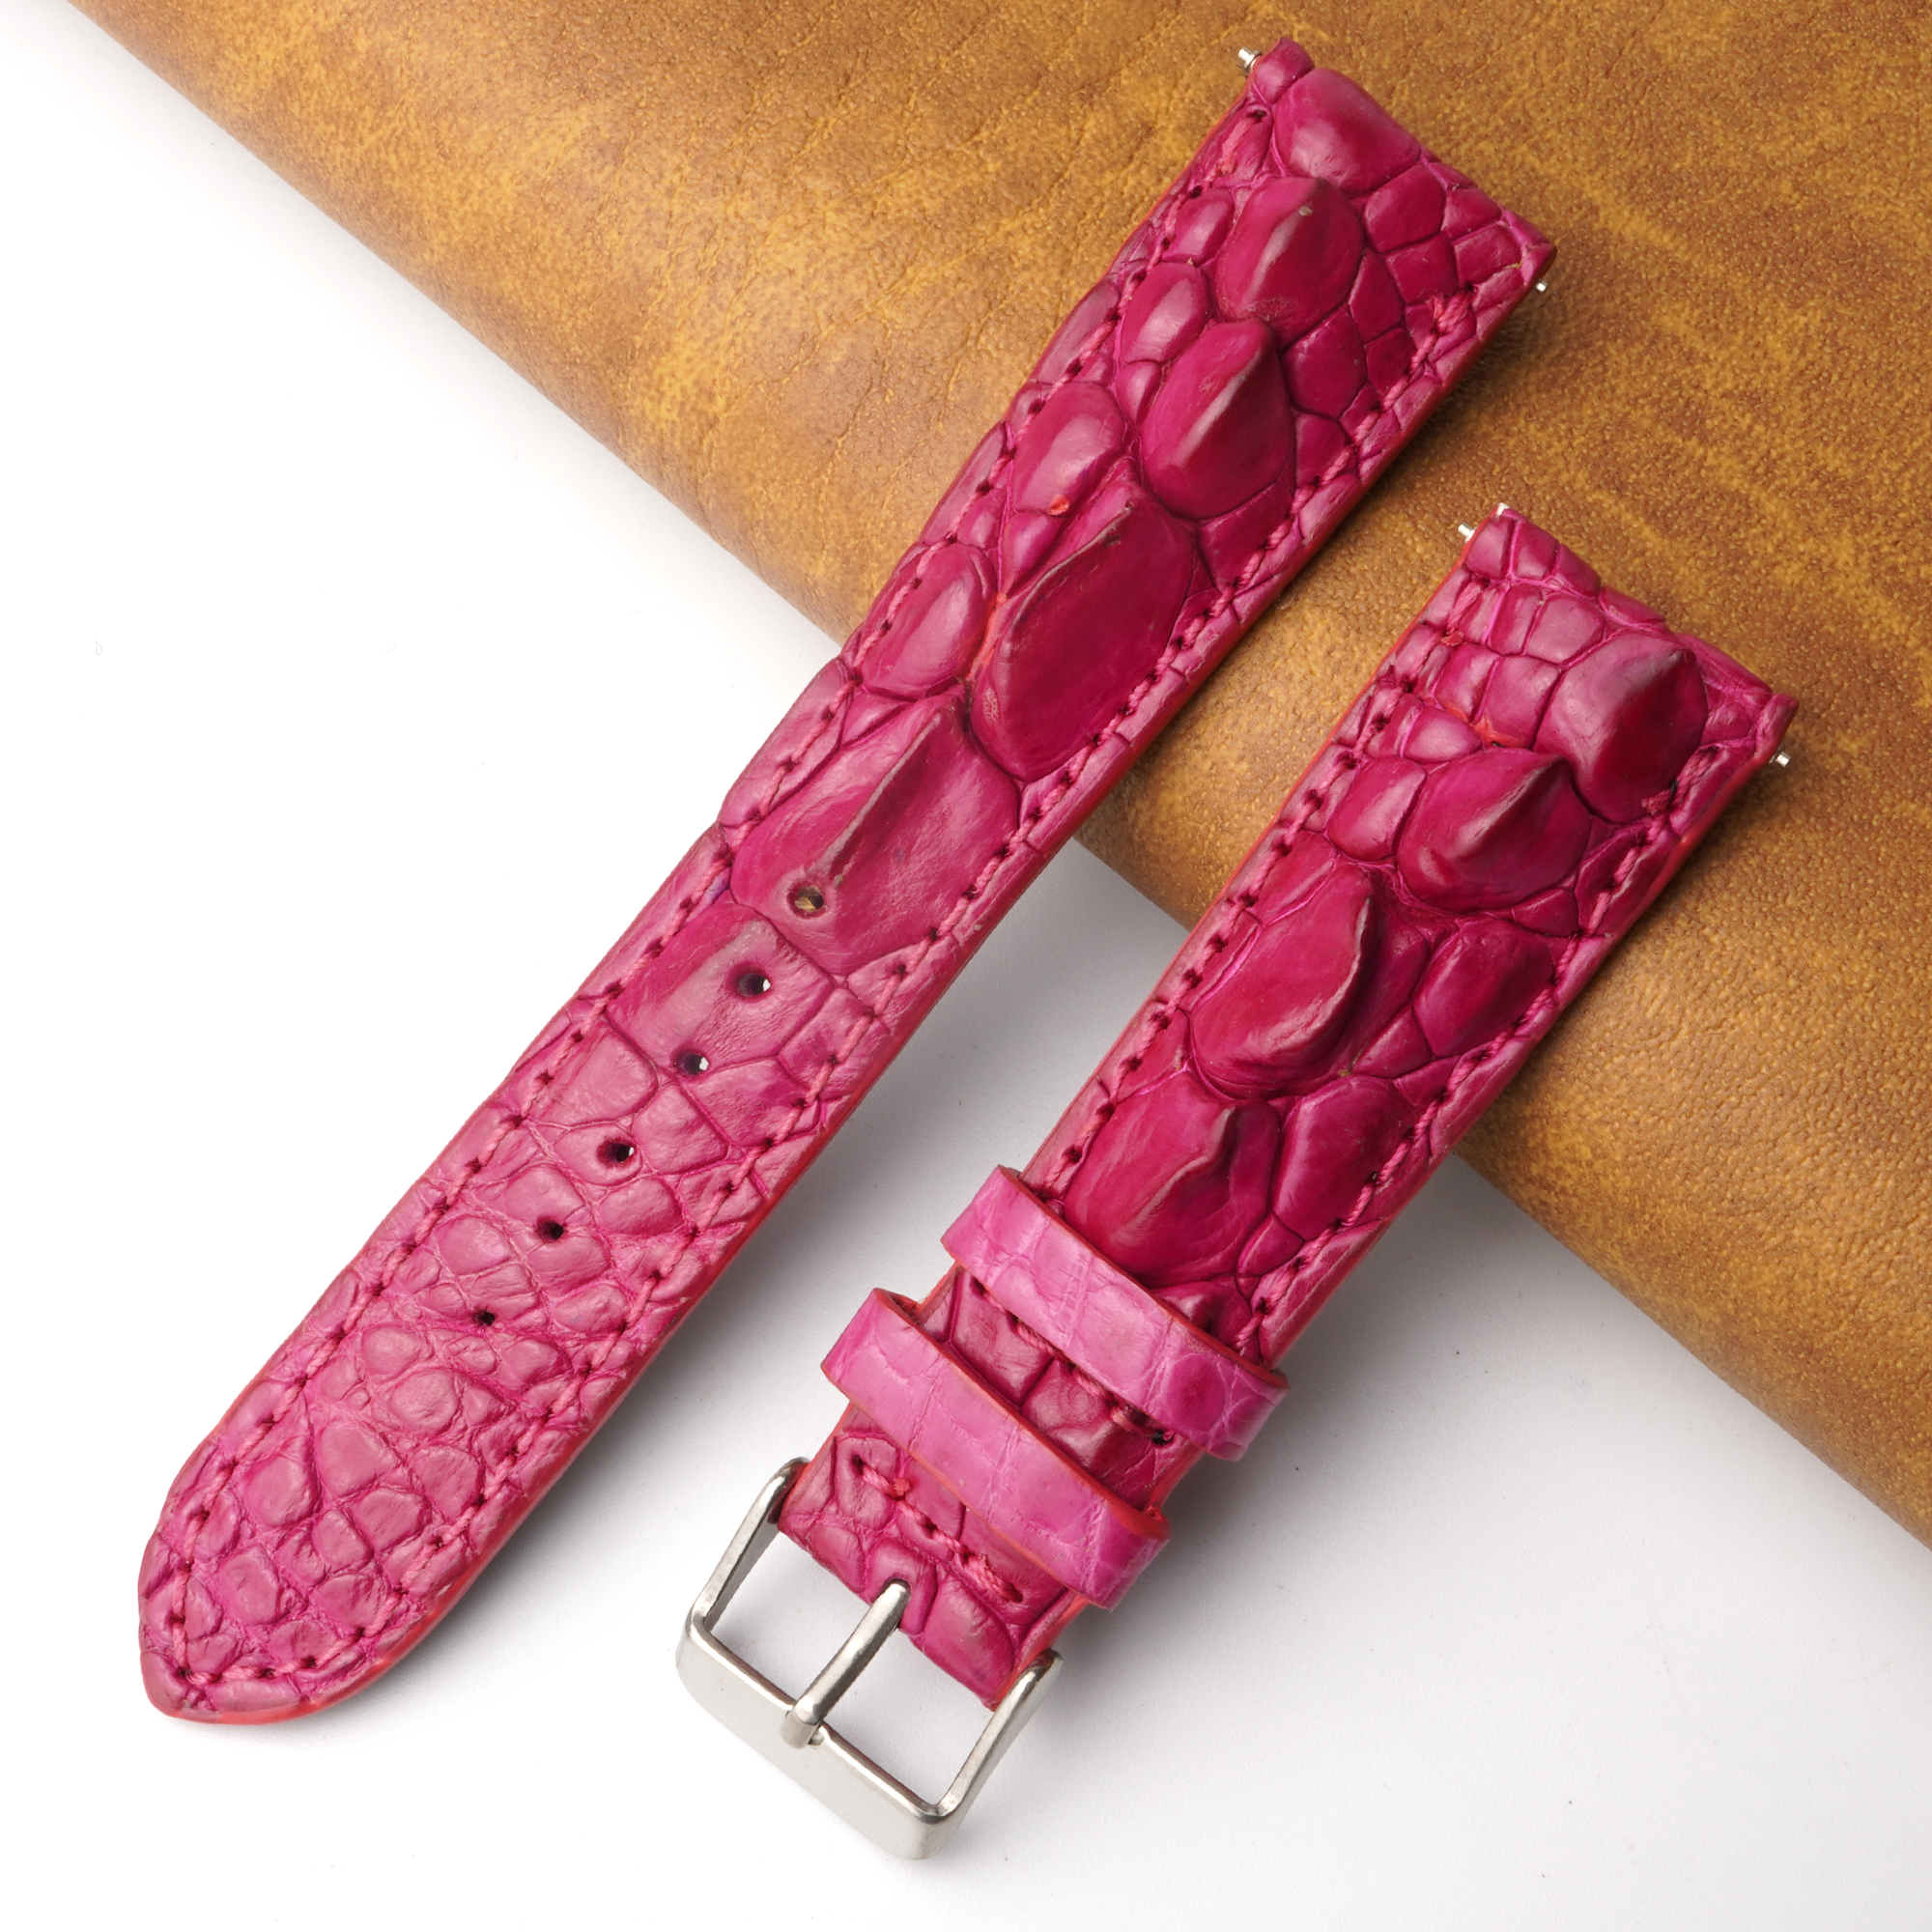 21mm Bright Pink Unique Pattern Alligator Leather Watch Strap For Men DH-225-L